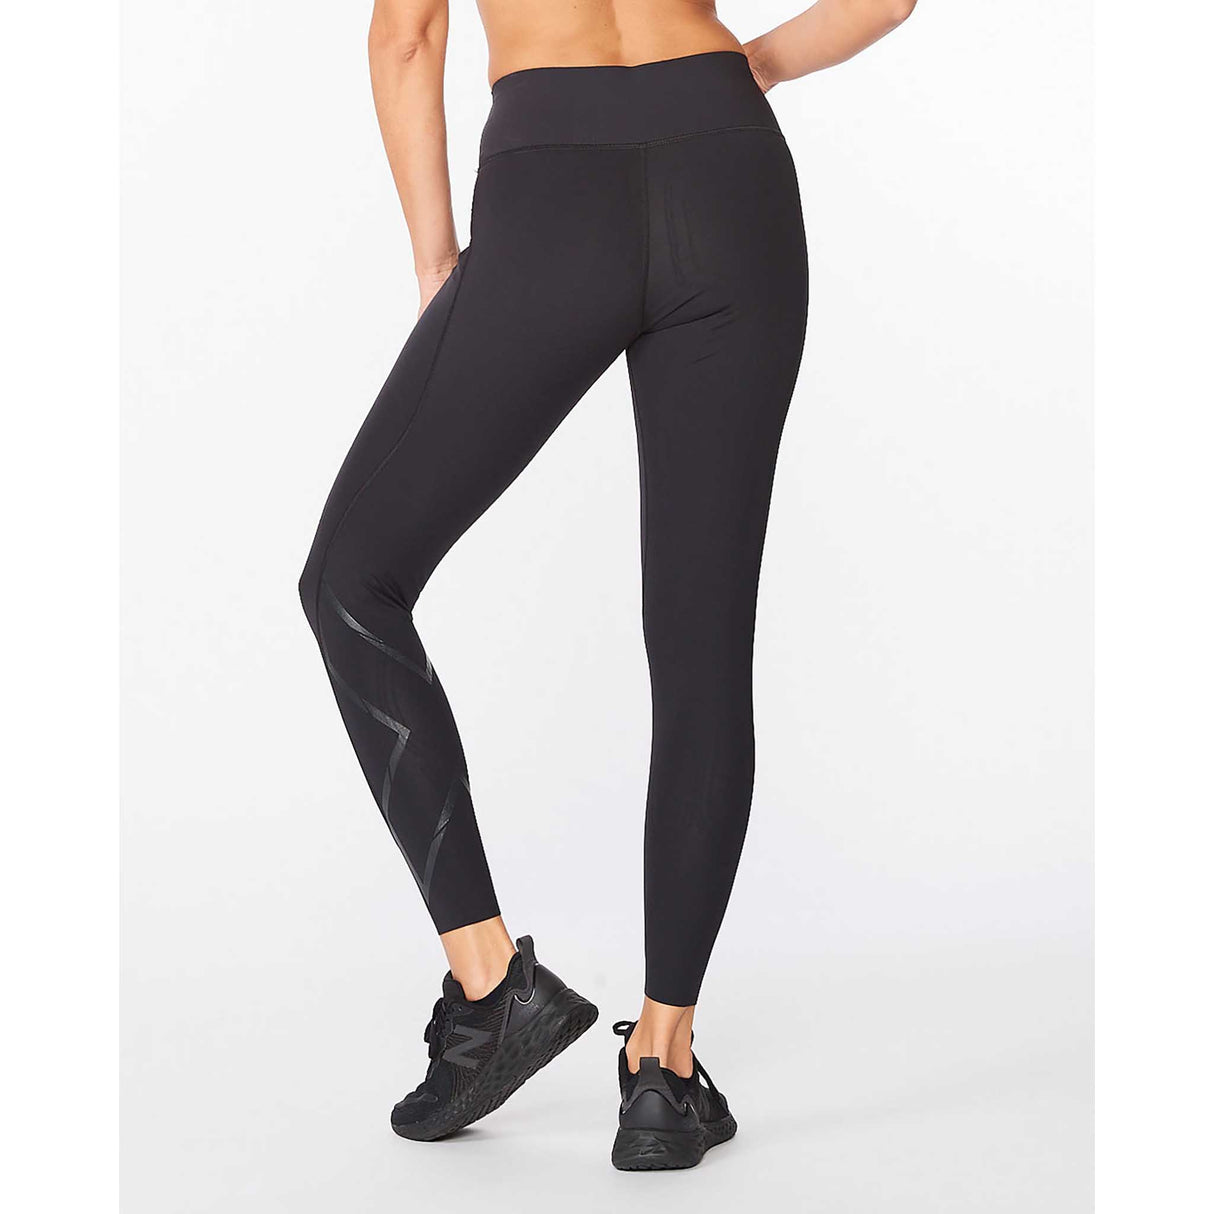 2XU Force Mid-Rise Compression Tights femme dos- noir